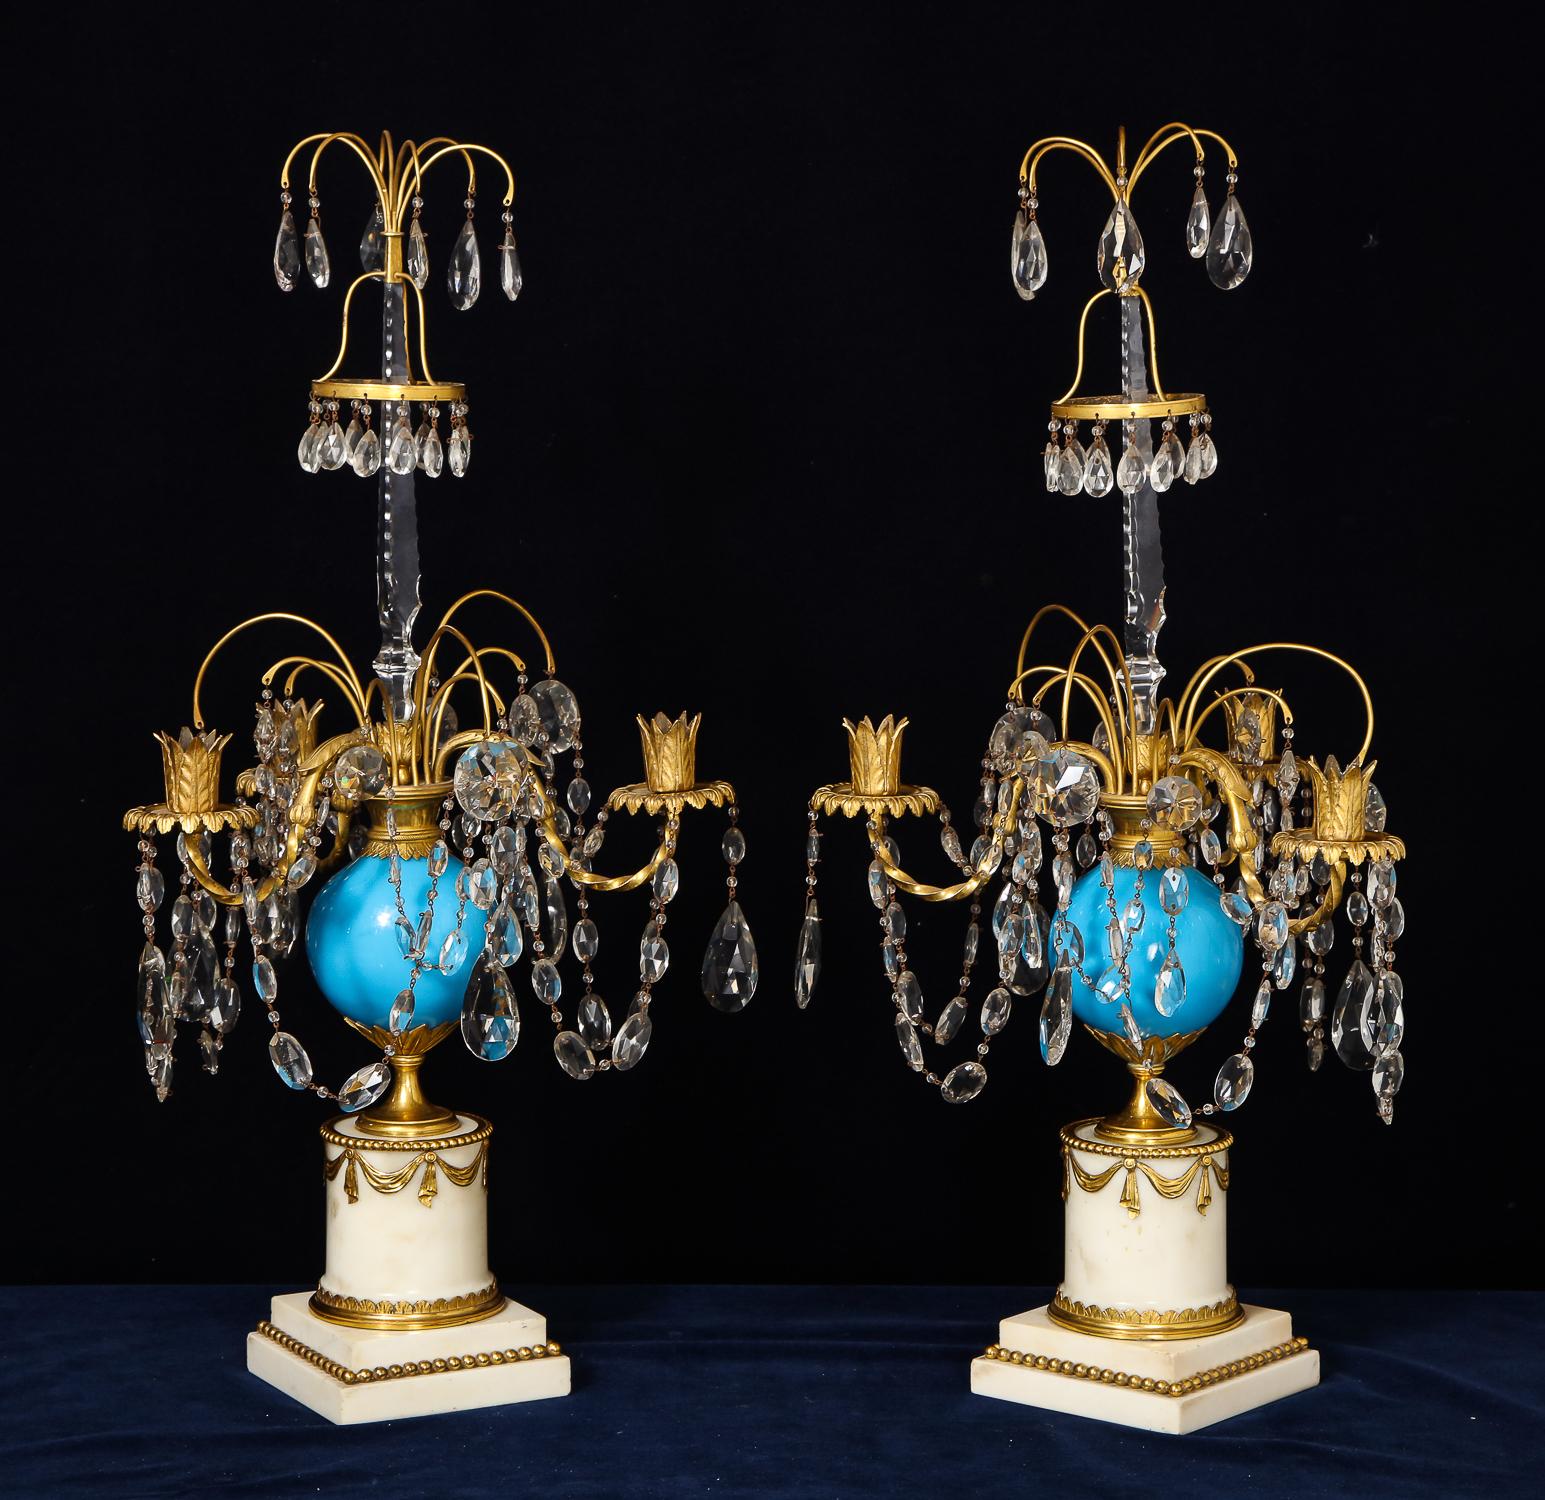 Ukrainian Pair of Antique Russian Neoclassical Gilt Bronze and Opaline Glass Candelabras For Sale